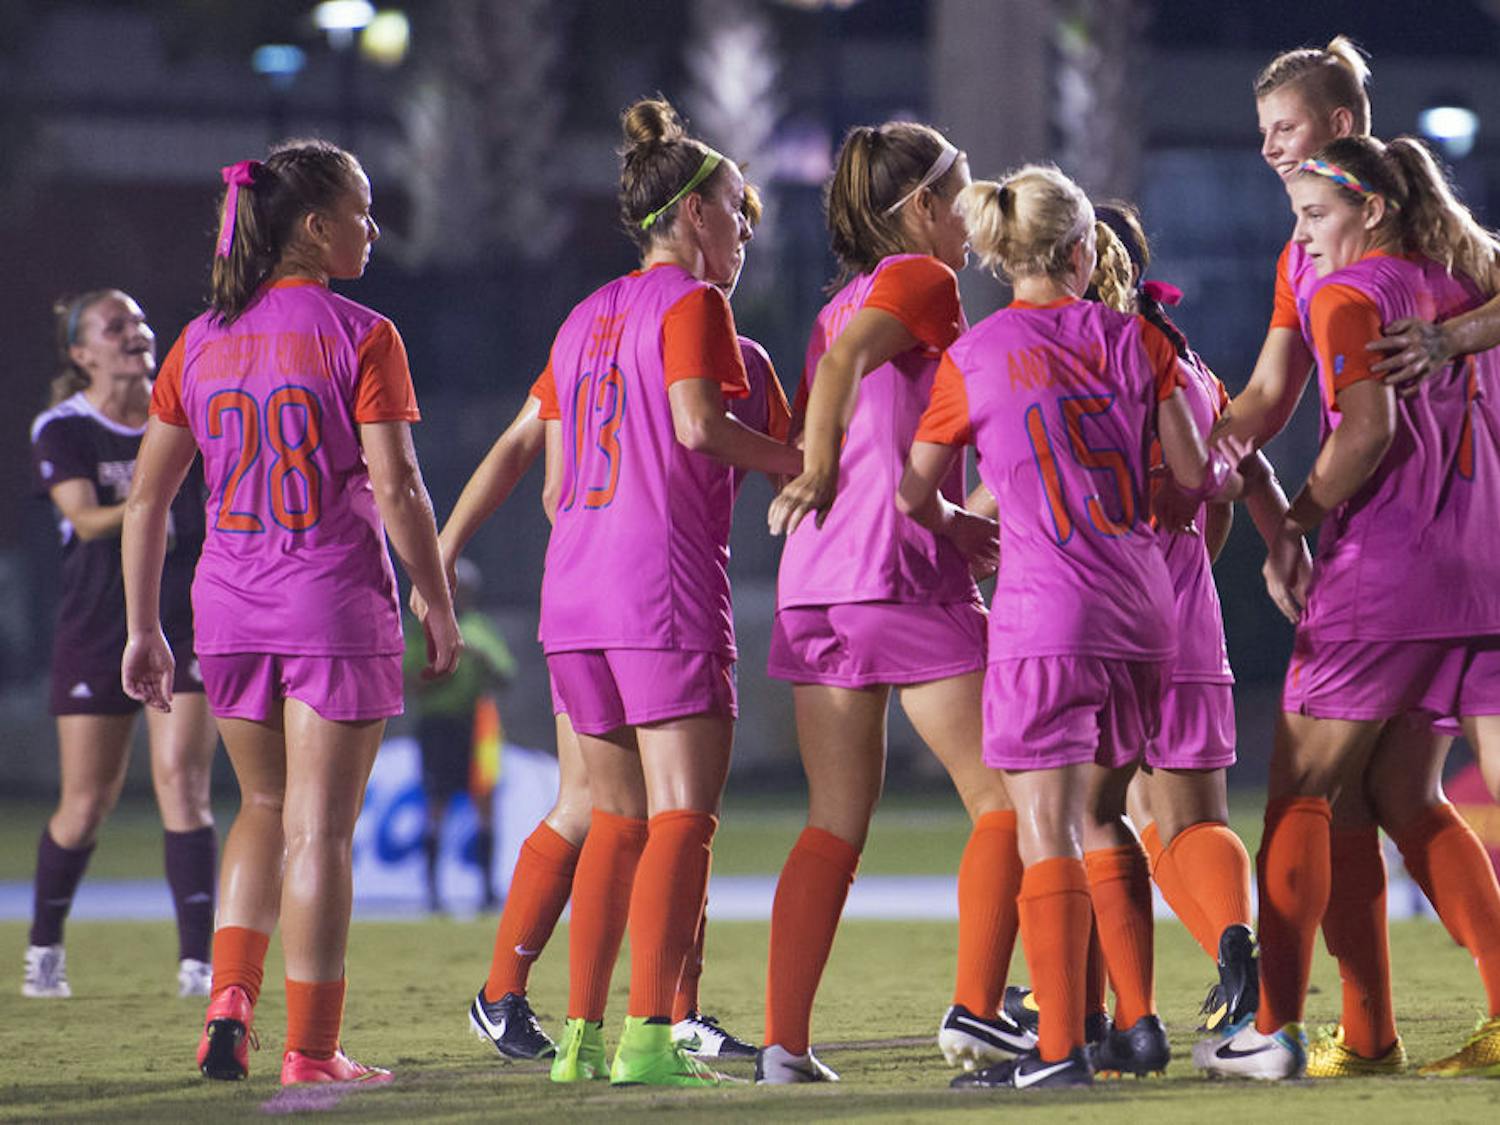 UF soccer players celebrate a goal during Florida's 5-1 win against Mississippi State on Friday at James G. Pressly Stadium.